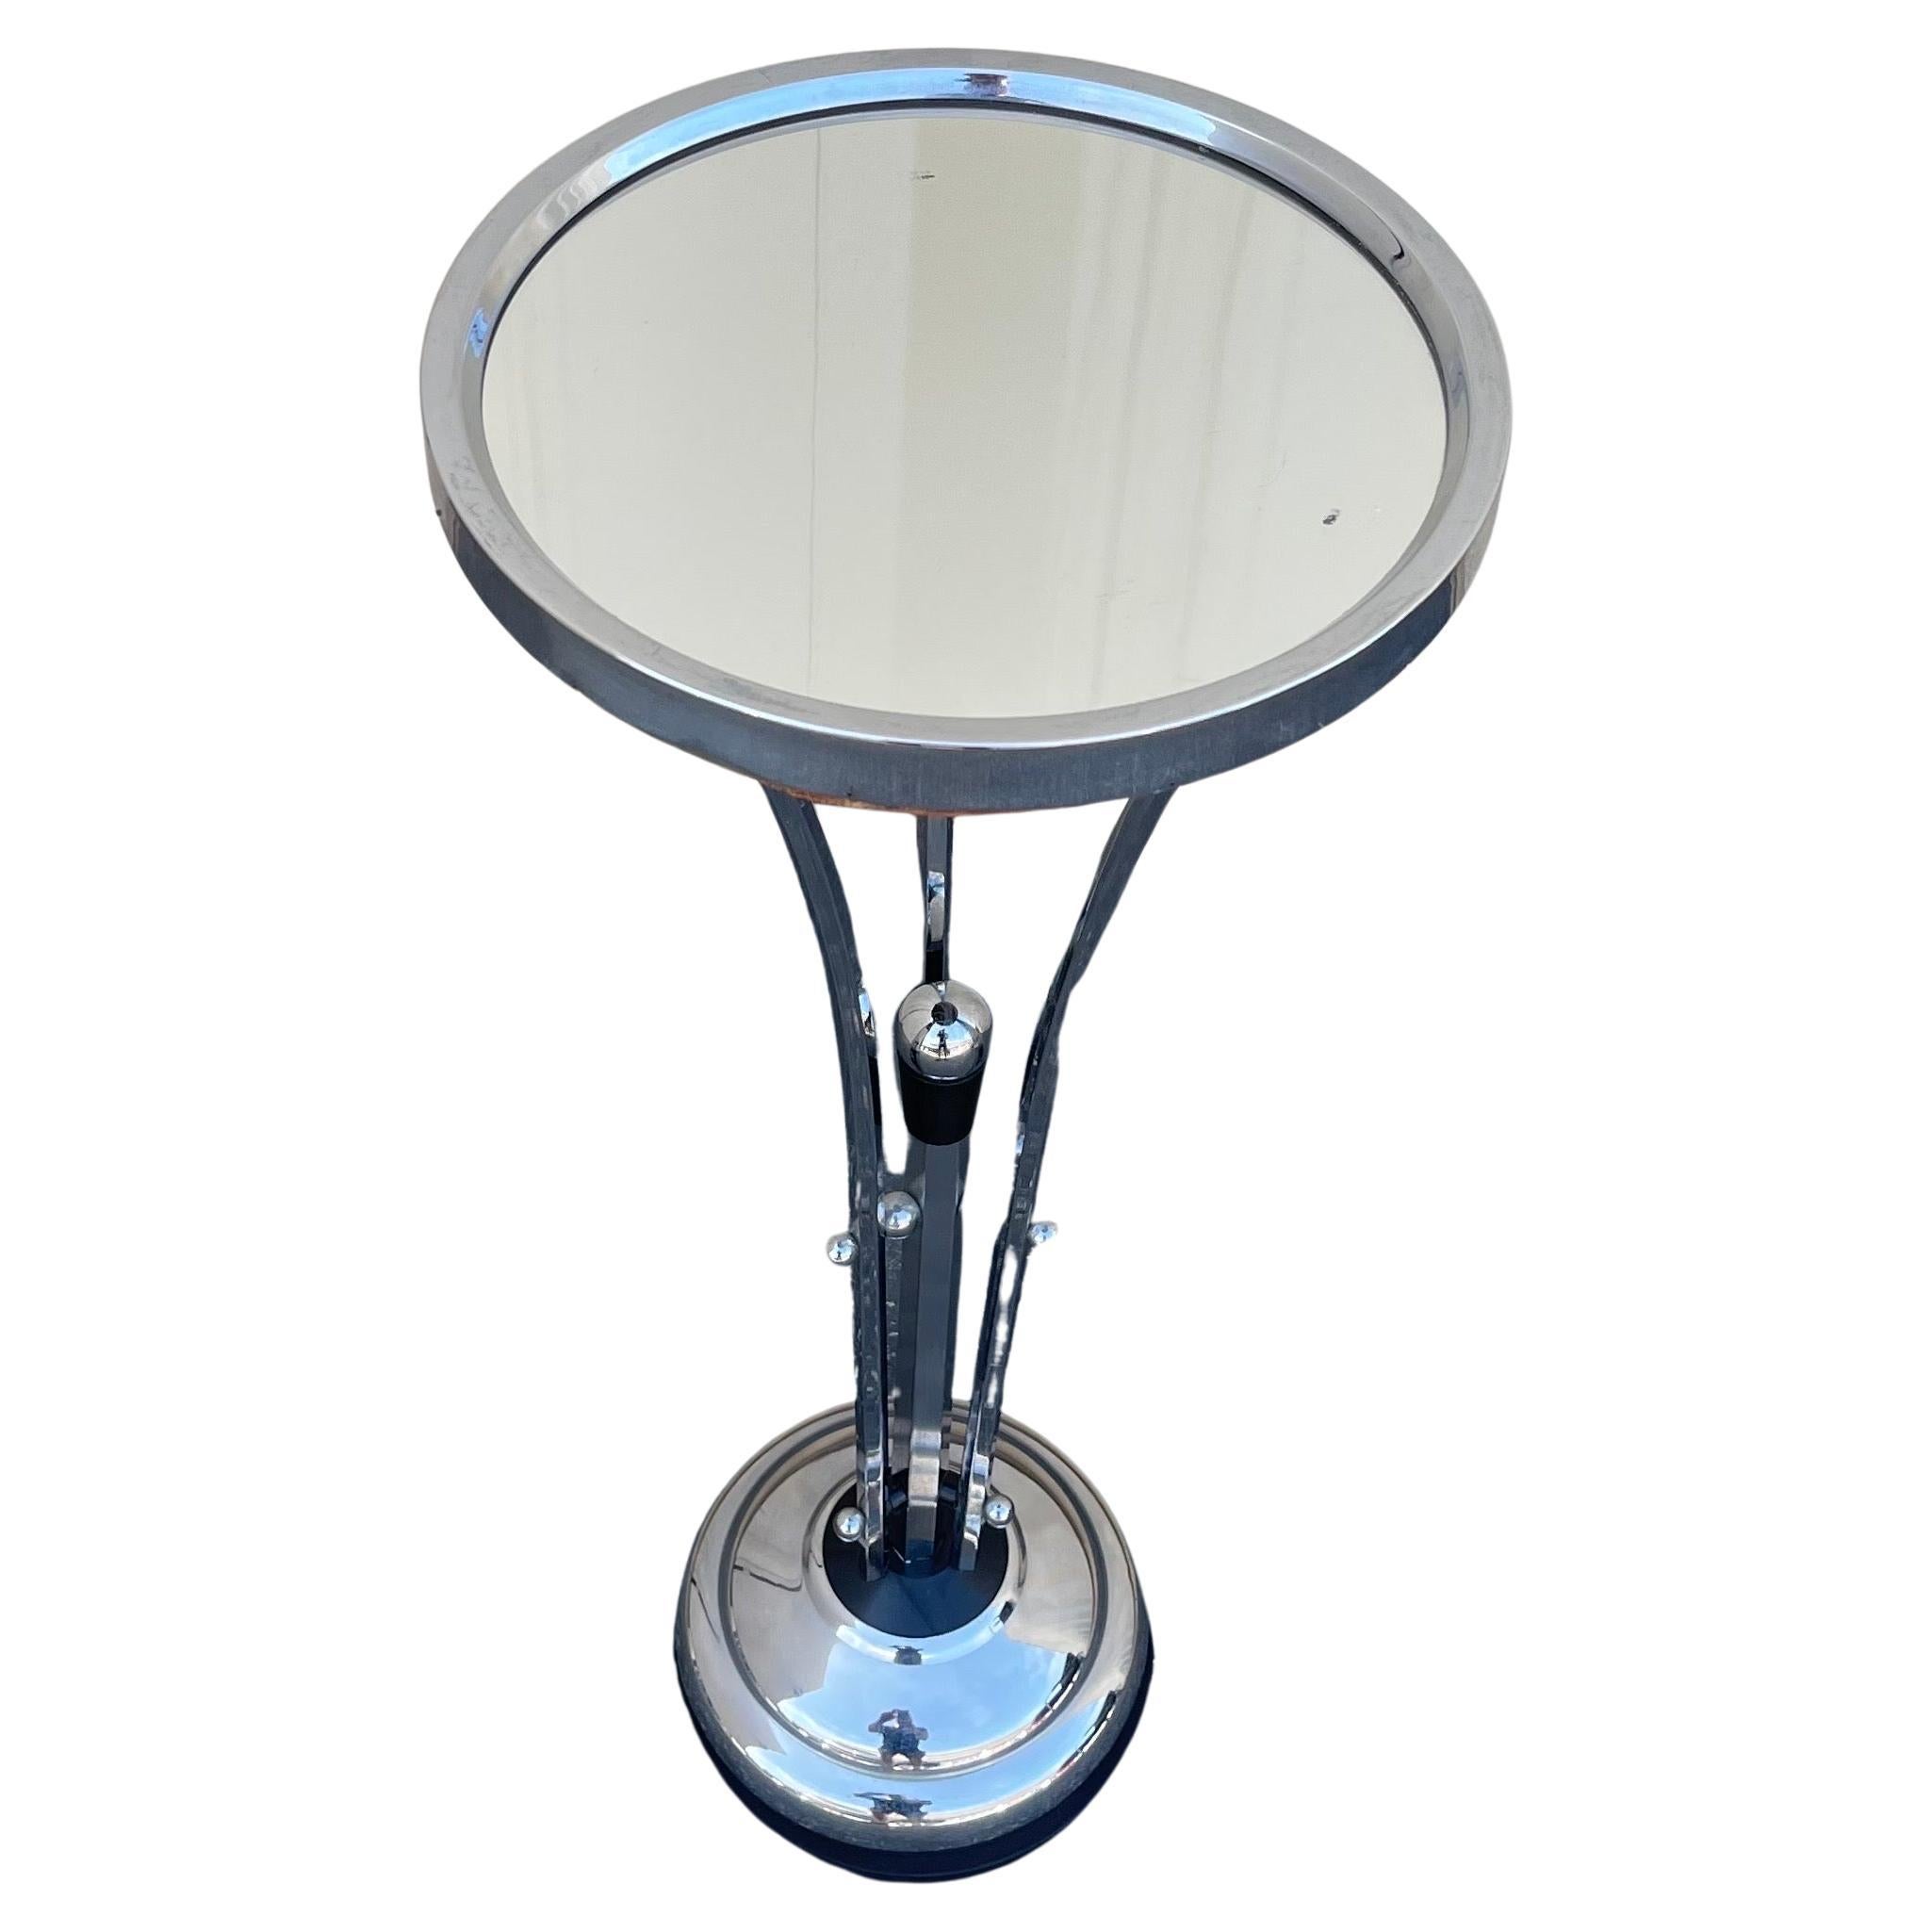 A very rare art deco chrome with mirror top martini / side table, circa 1940's.  The table has a great deco look with a black capped finial rising through the middle of the base.  The piece is in good vintage condition and measures 10.375